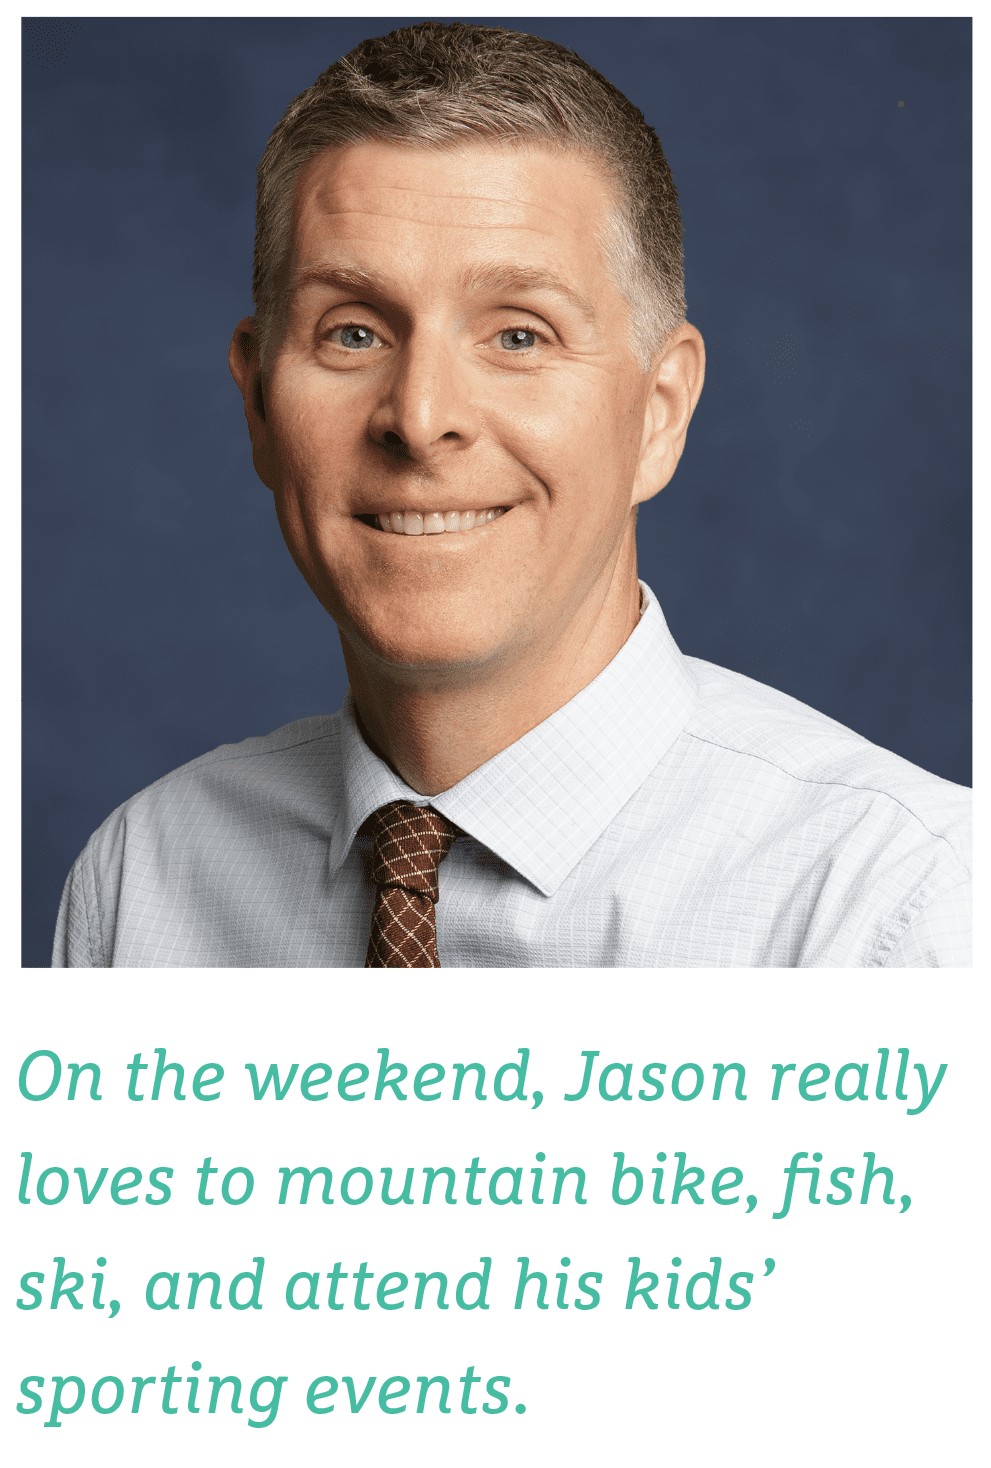 Photo of Jason - on the weekend, Jason really loves to mountain bike, fish, ski, and attend his kids' sporting events.